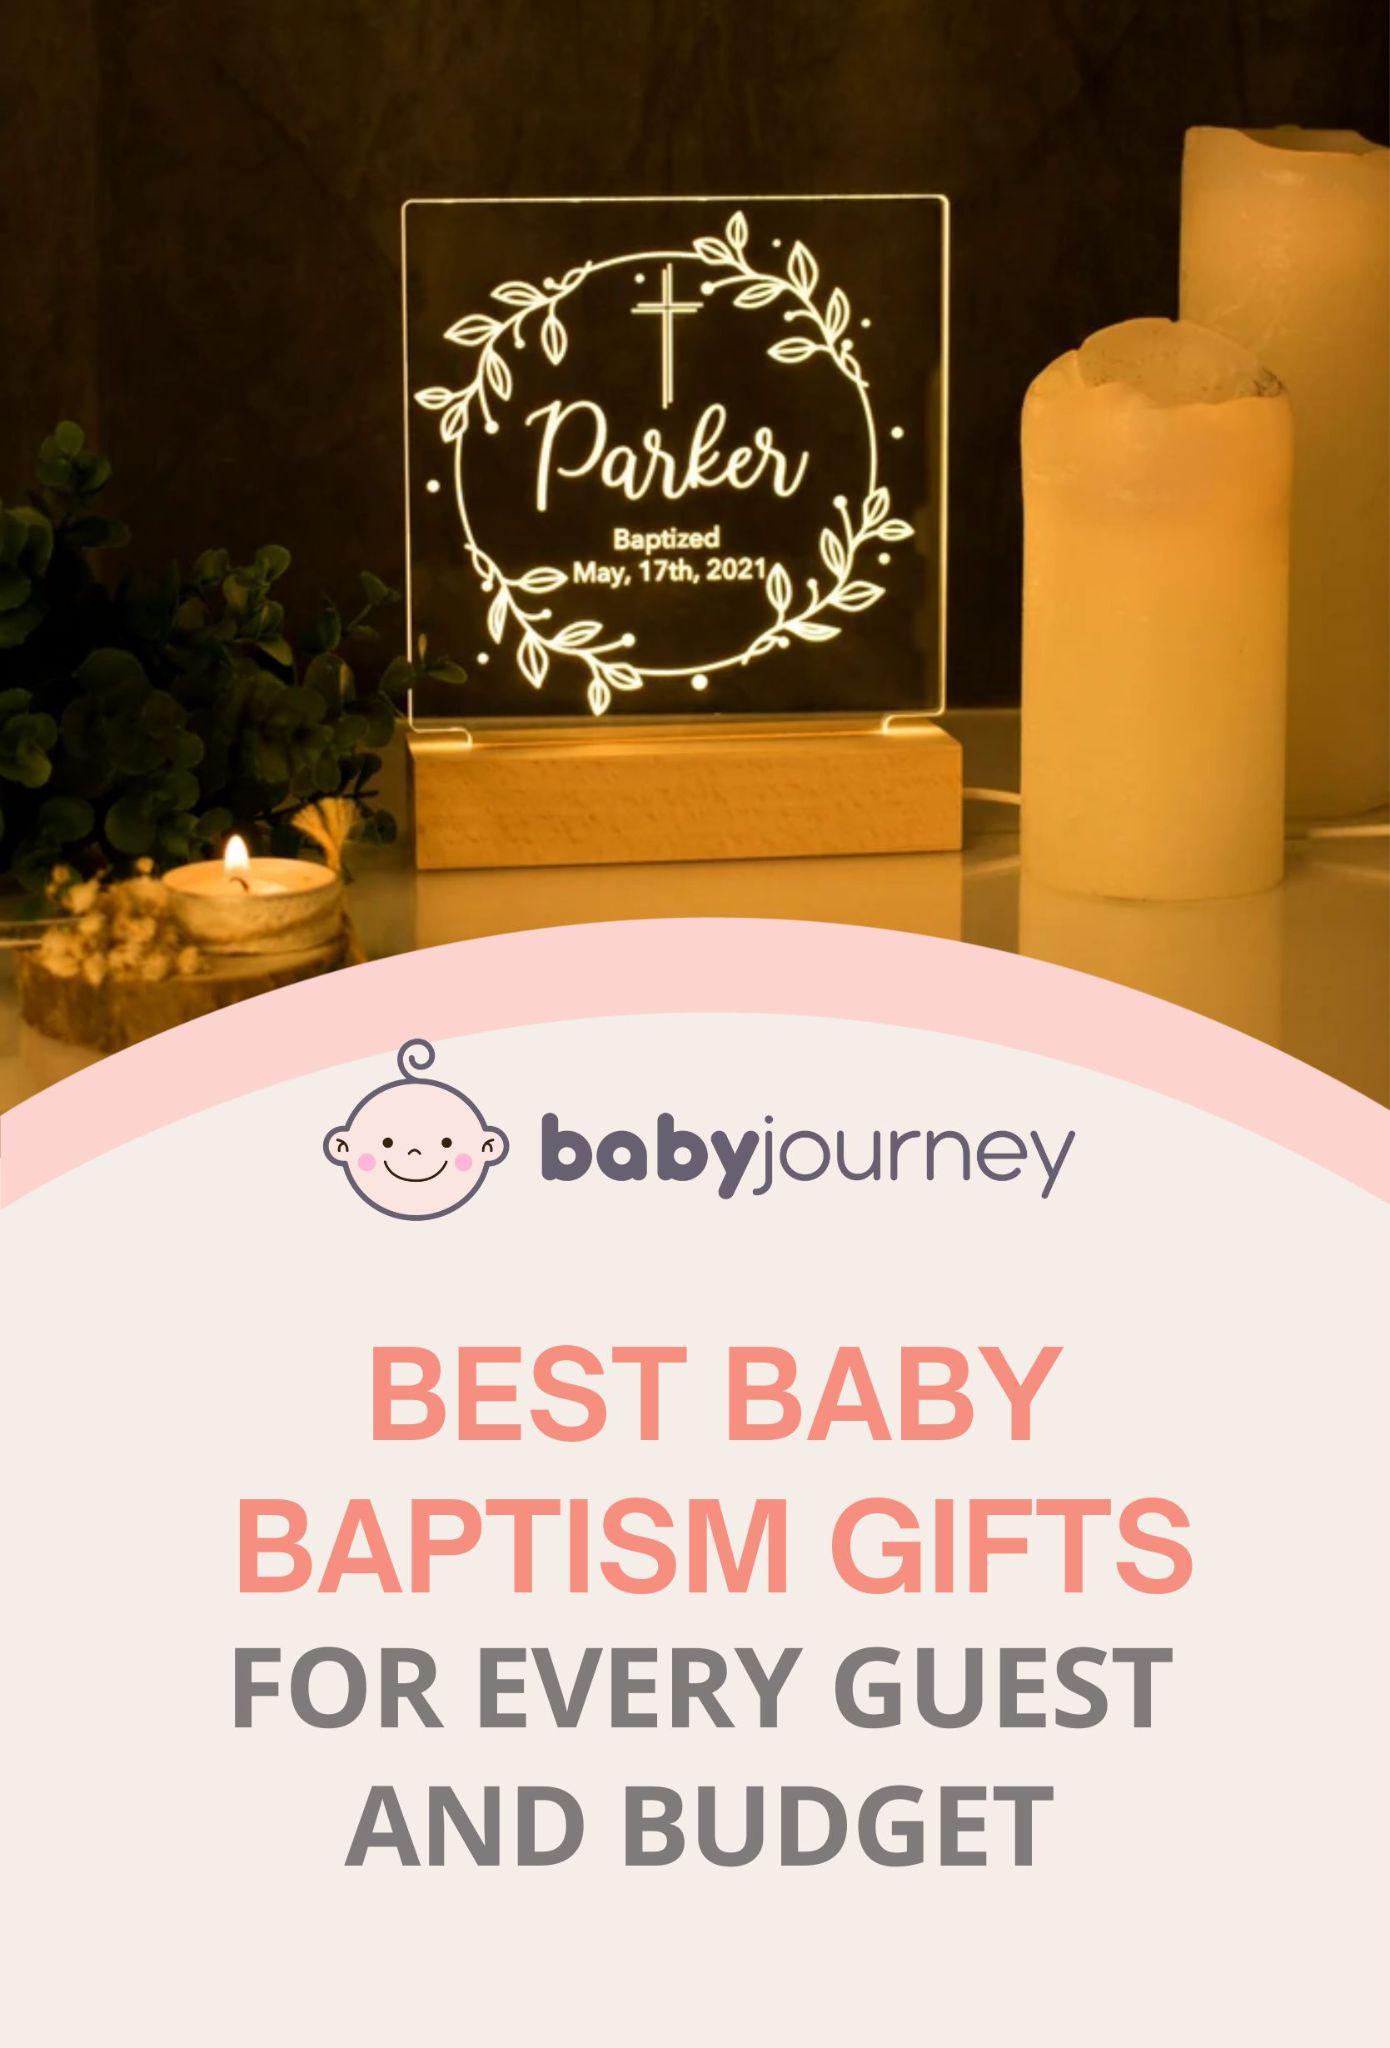 Best Baby Baptism Gifts For Every Guest and Budget pinterest - Baby Journey